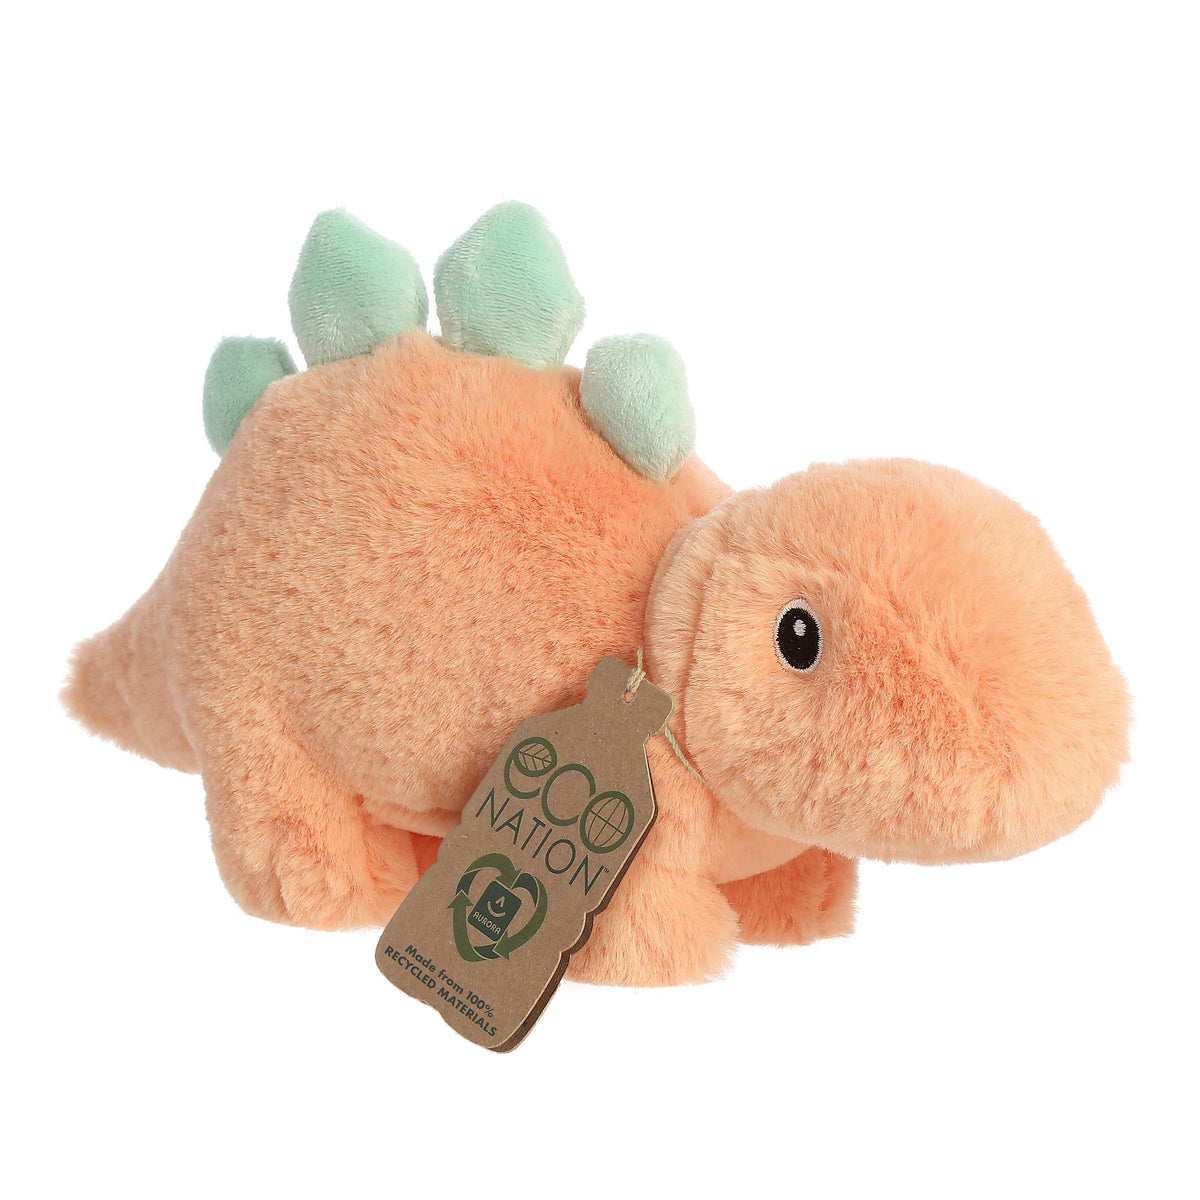 Sweet dino stegosaurus plush with an orange body and teal spikes, embroidered eyes, and an eco-nation tag